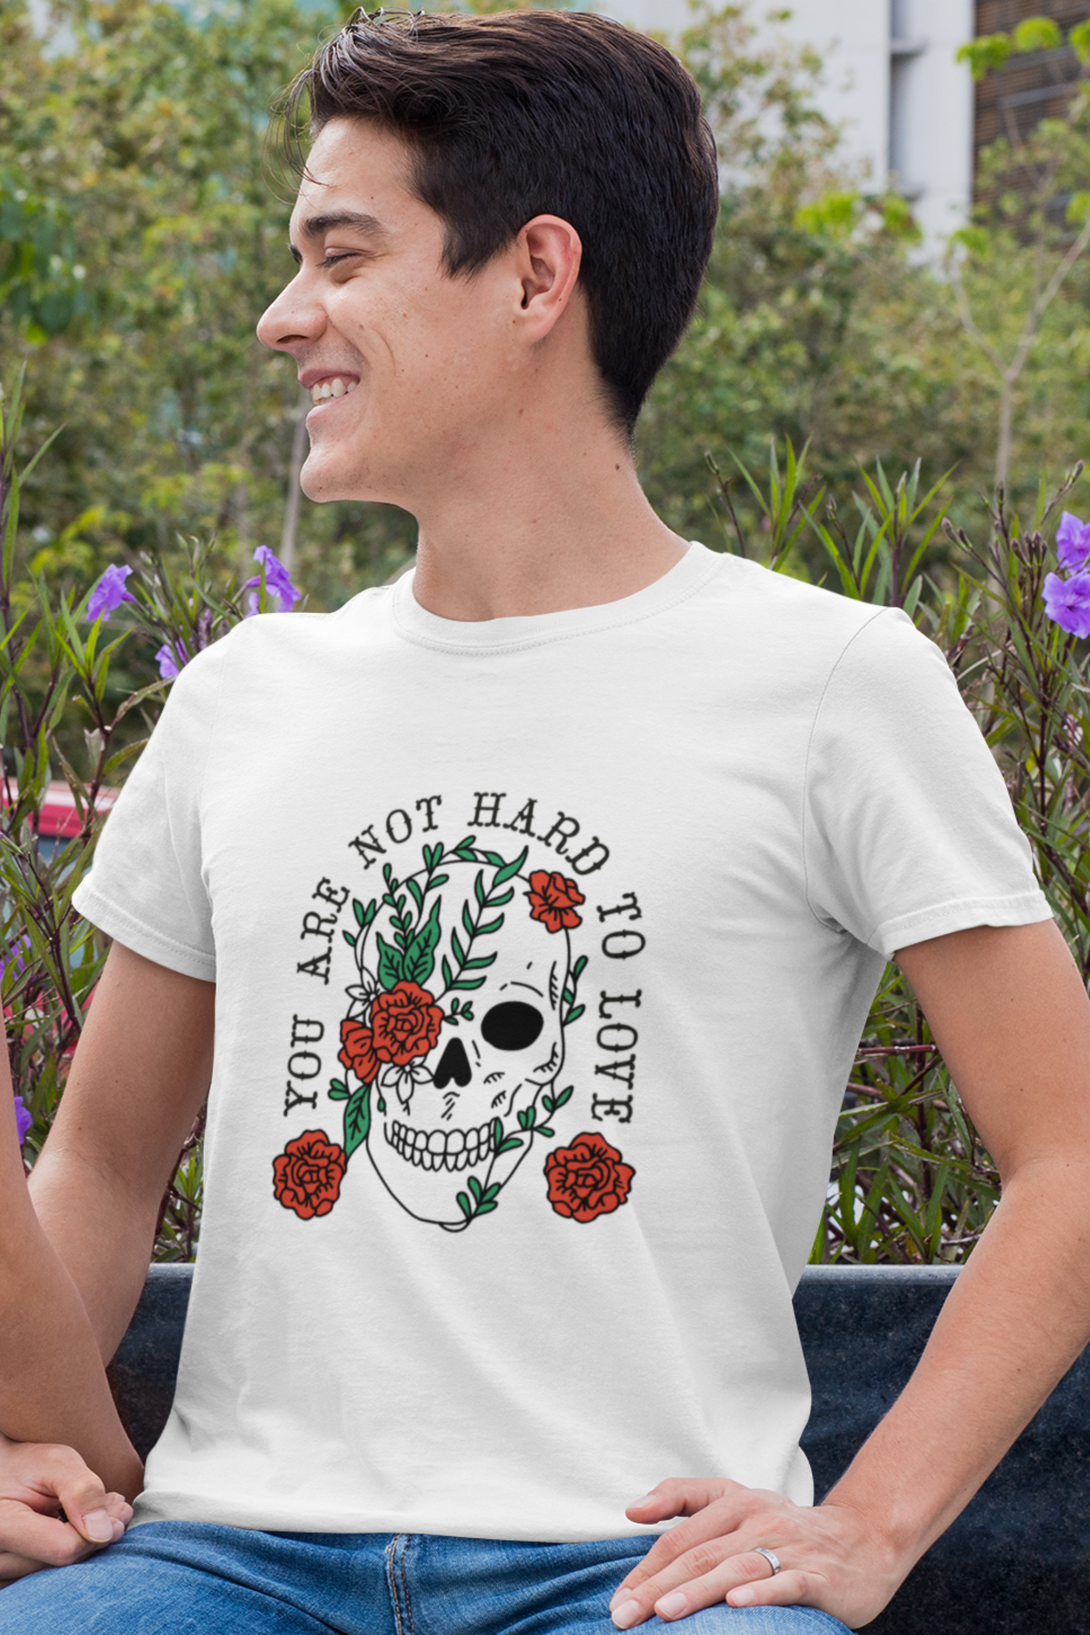 You Are Not Hard To Love Printed T-Shirt For Men - WowWaves - 8